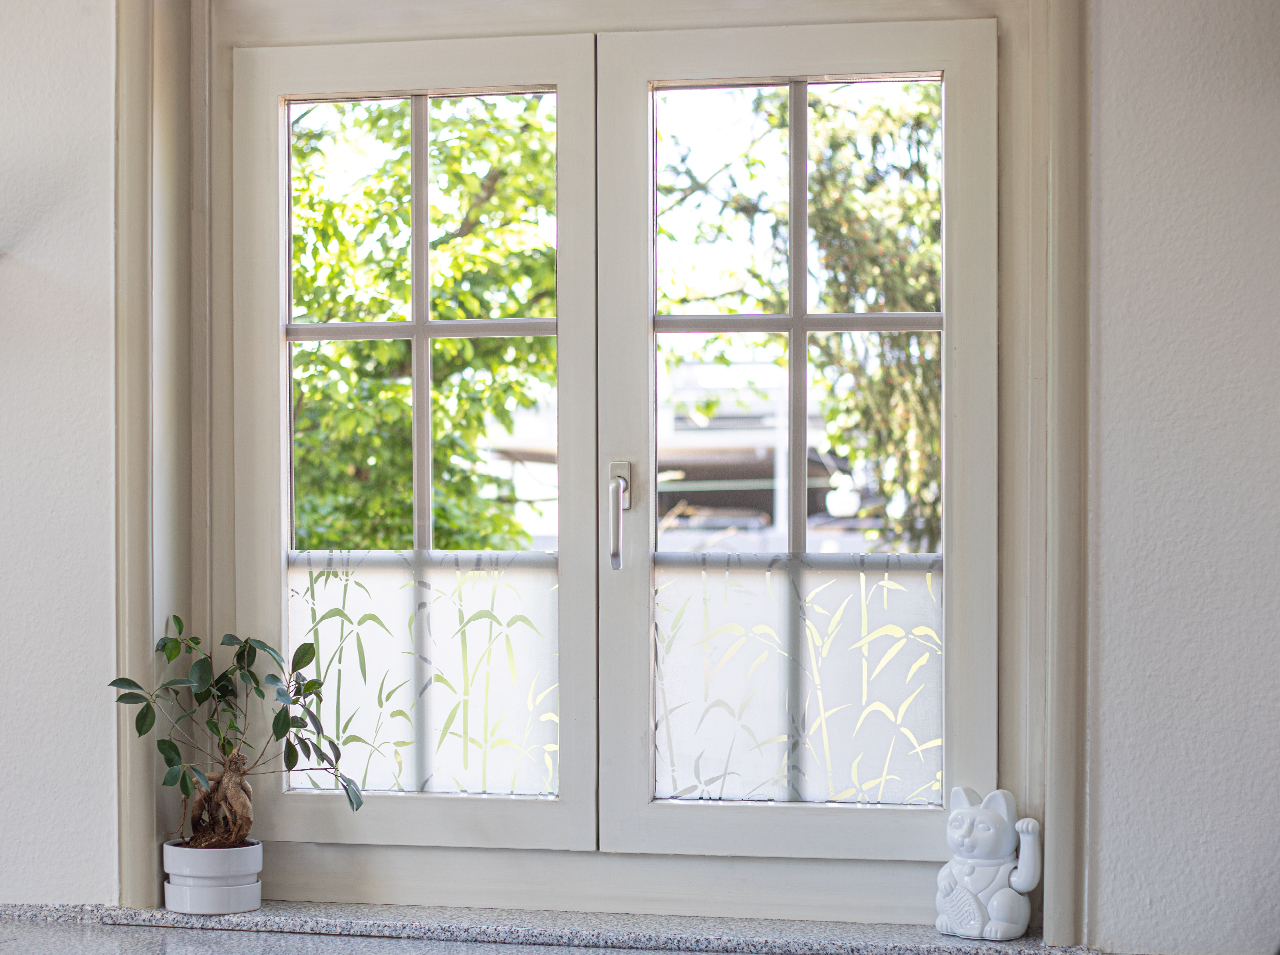 Window covered with opaque window foil in bamboo look for privacy.